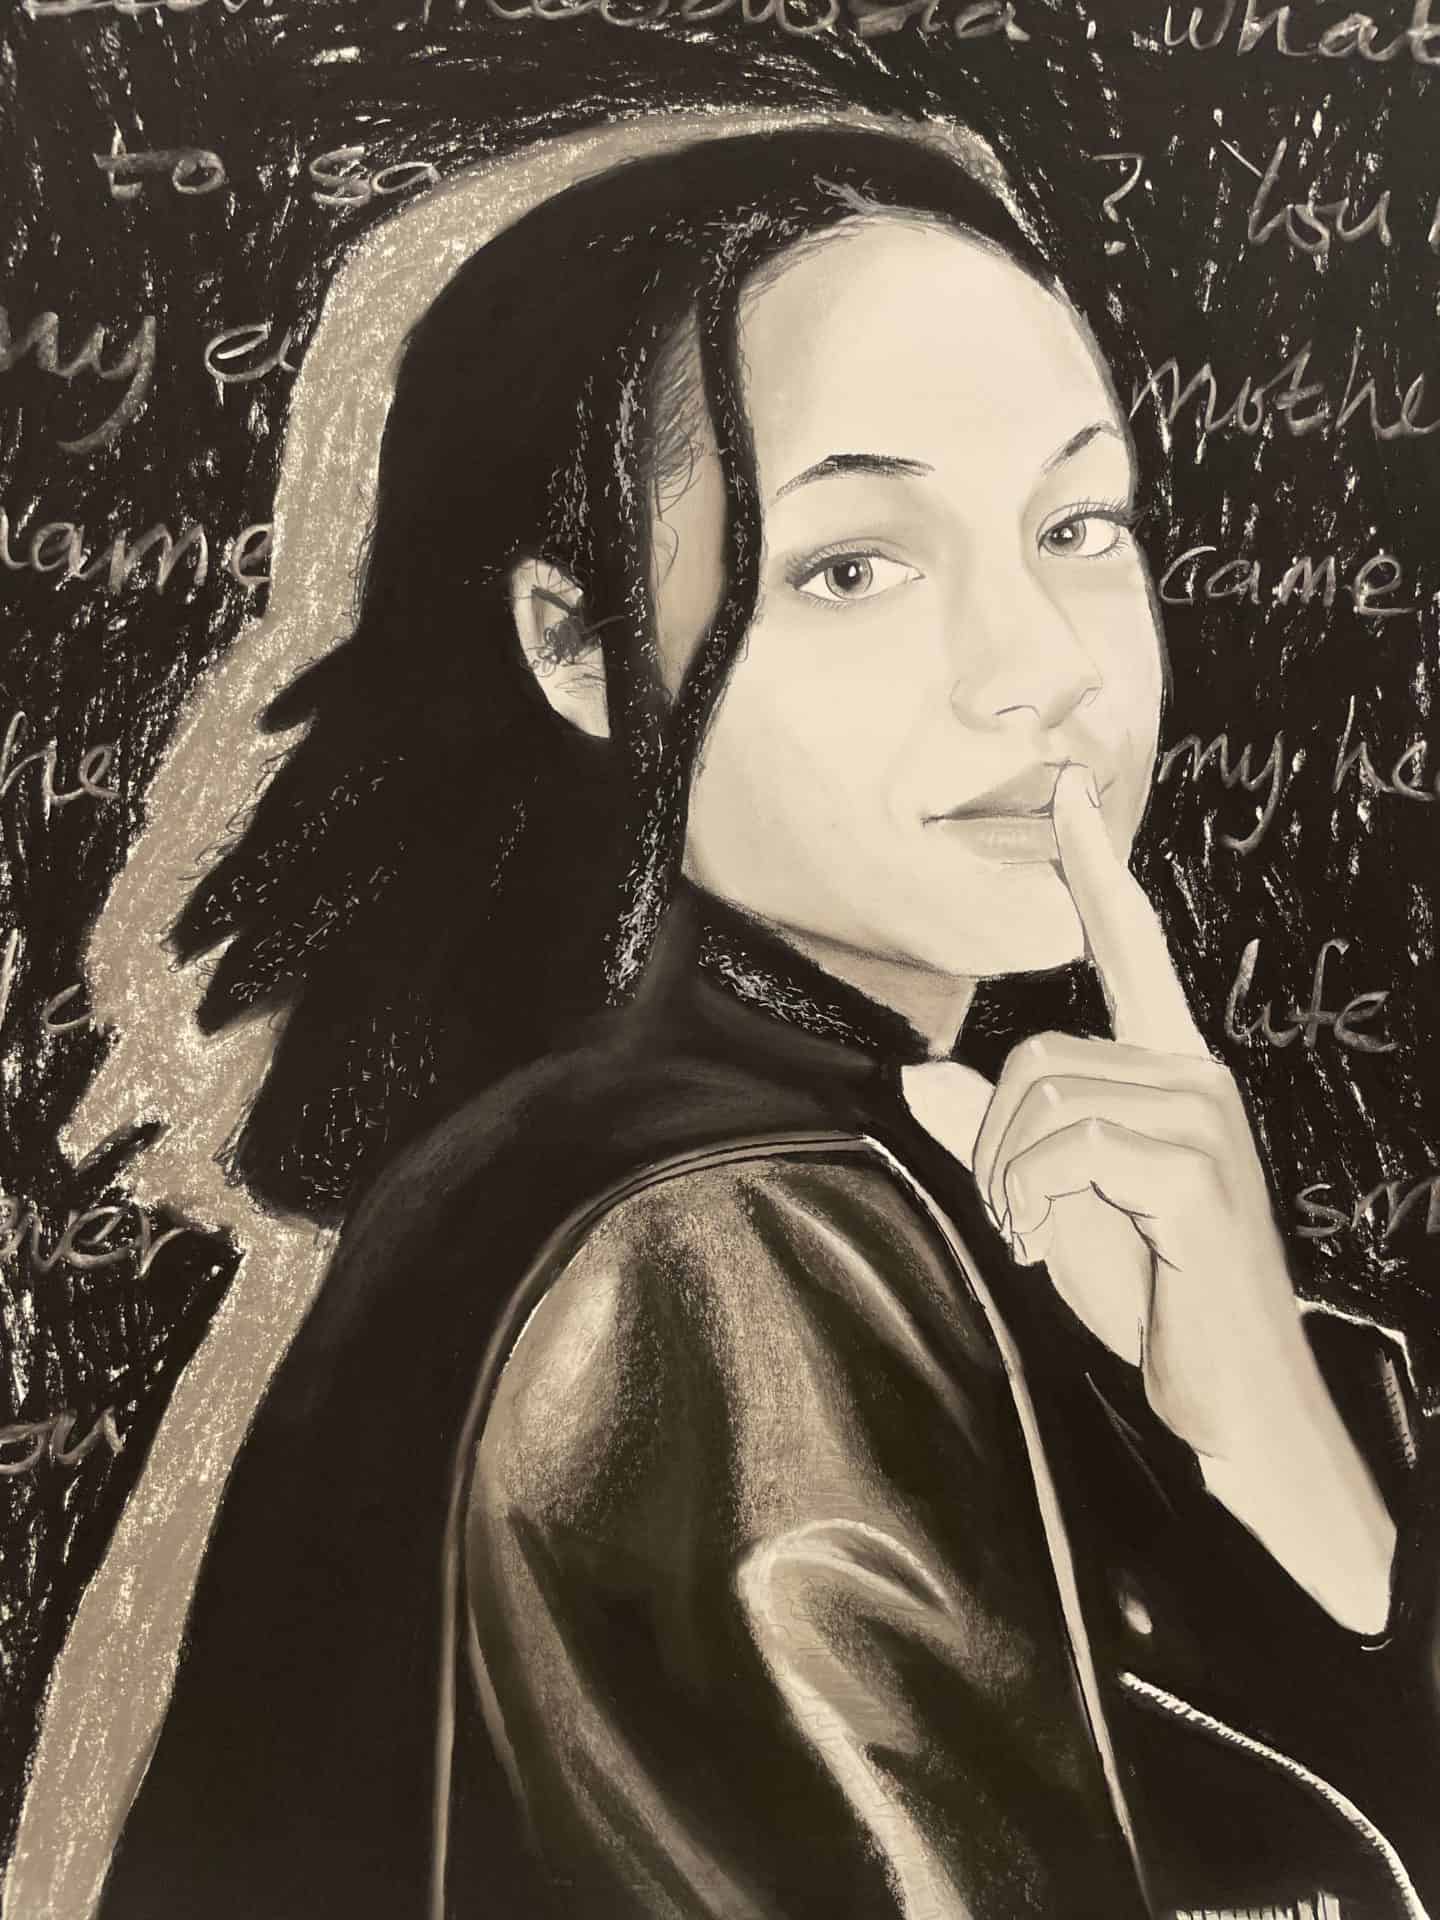 Nationally acclaimed artist Conrad Egyir shows charcoal portraits of students, colleagues and friends in his solo show at MCLA's Gallery 51. Press image by permission of MCLA